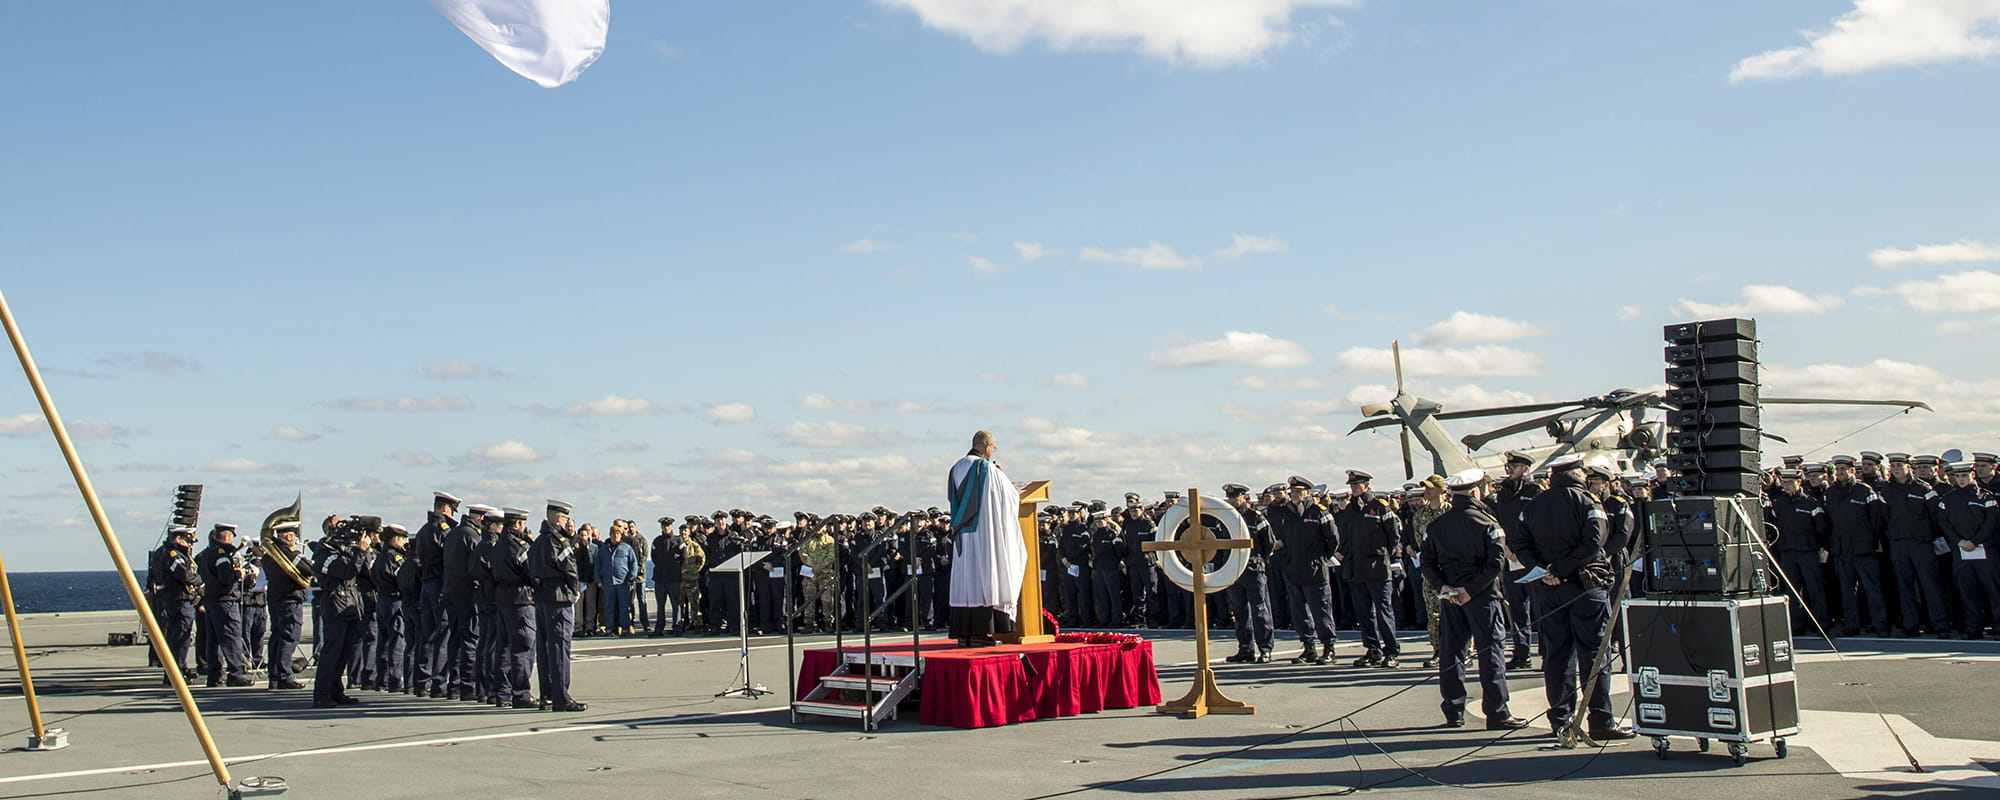 HMS Queen Elizabeth took time out of her busy F35B trials to remember the fallen with her own Remembrance Service